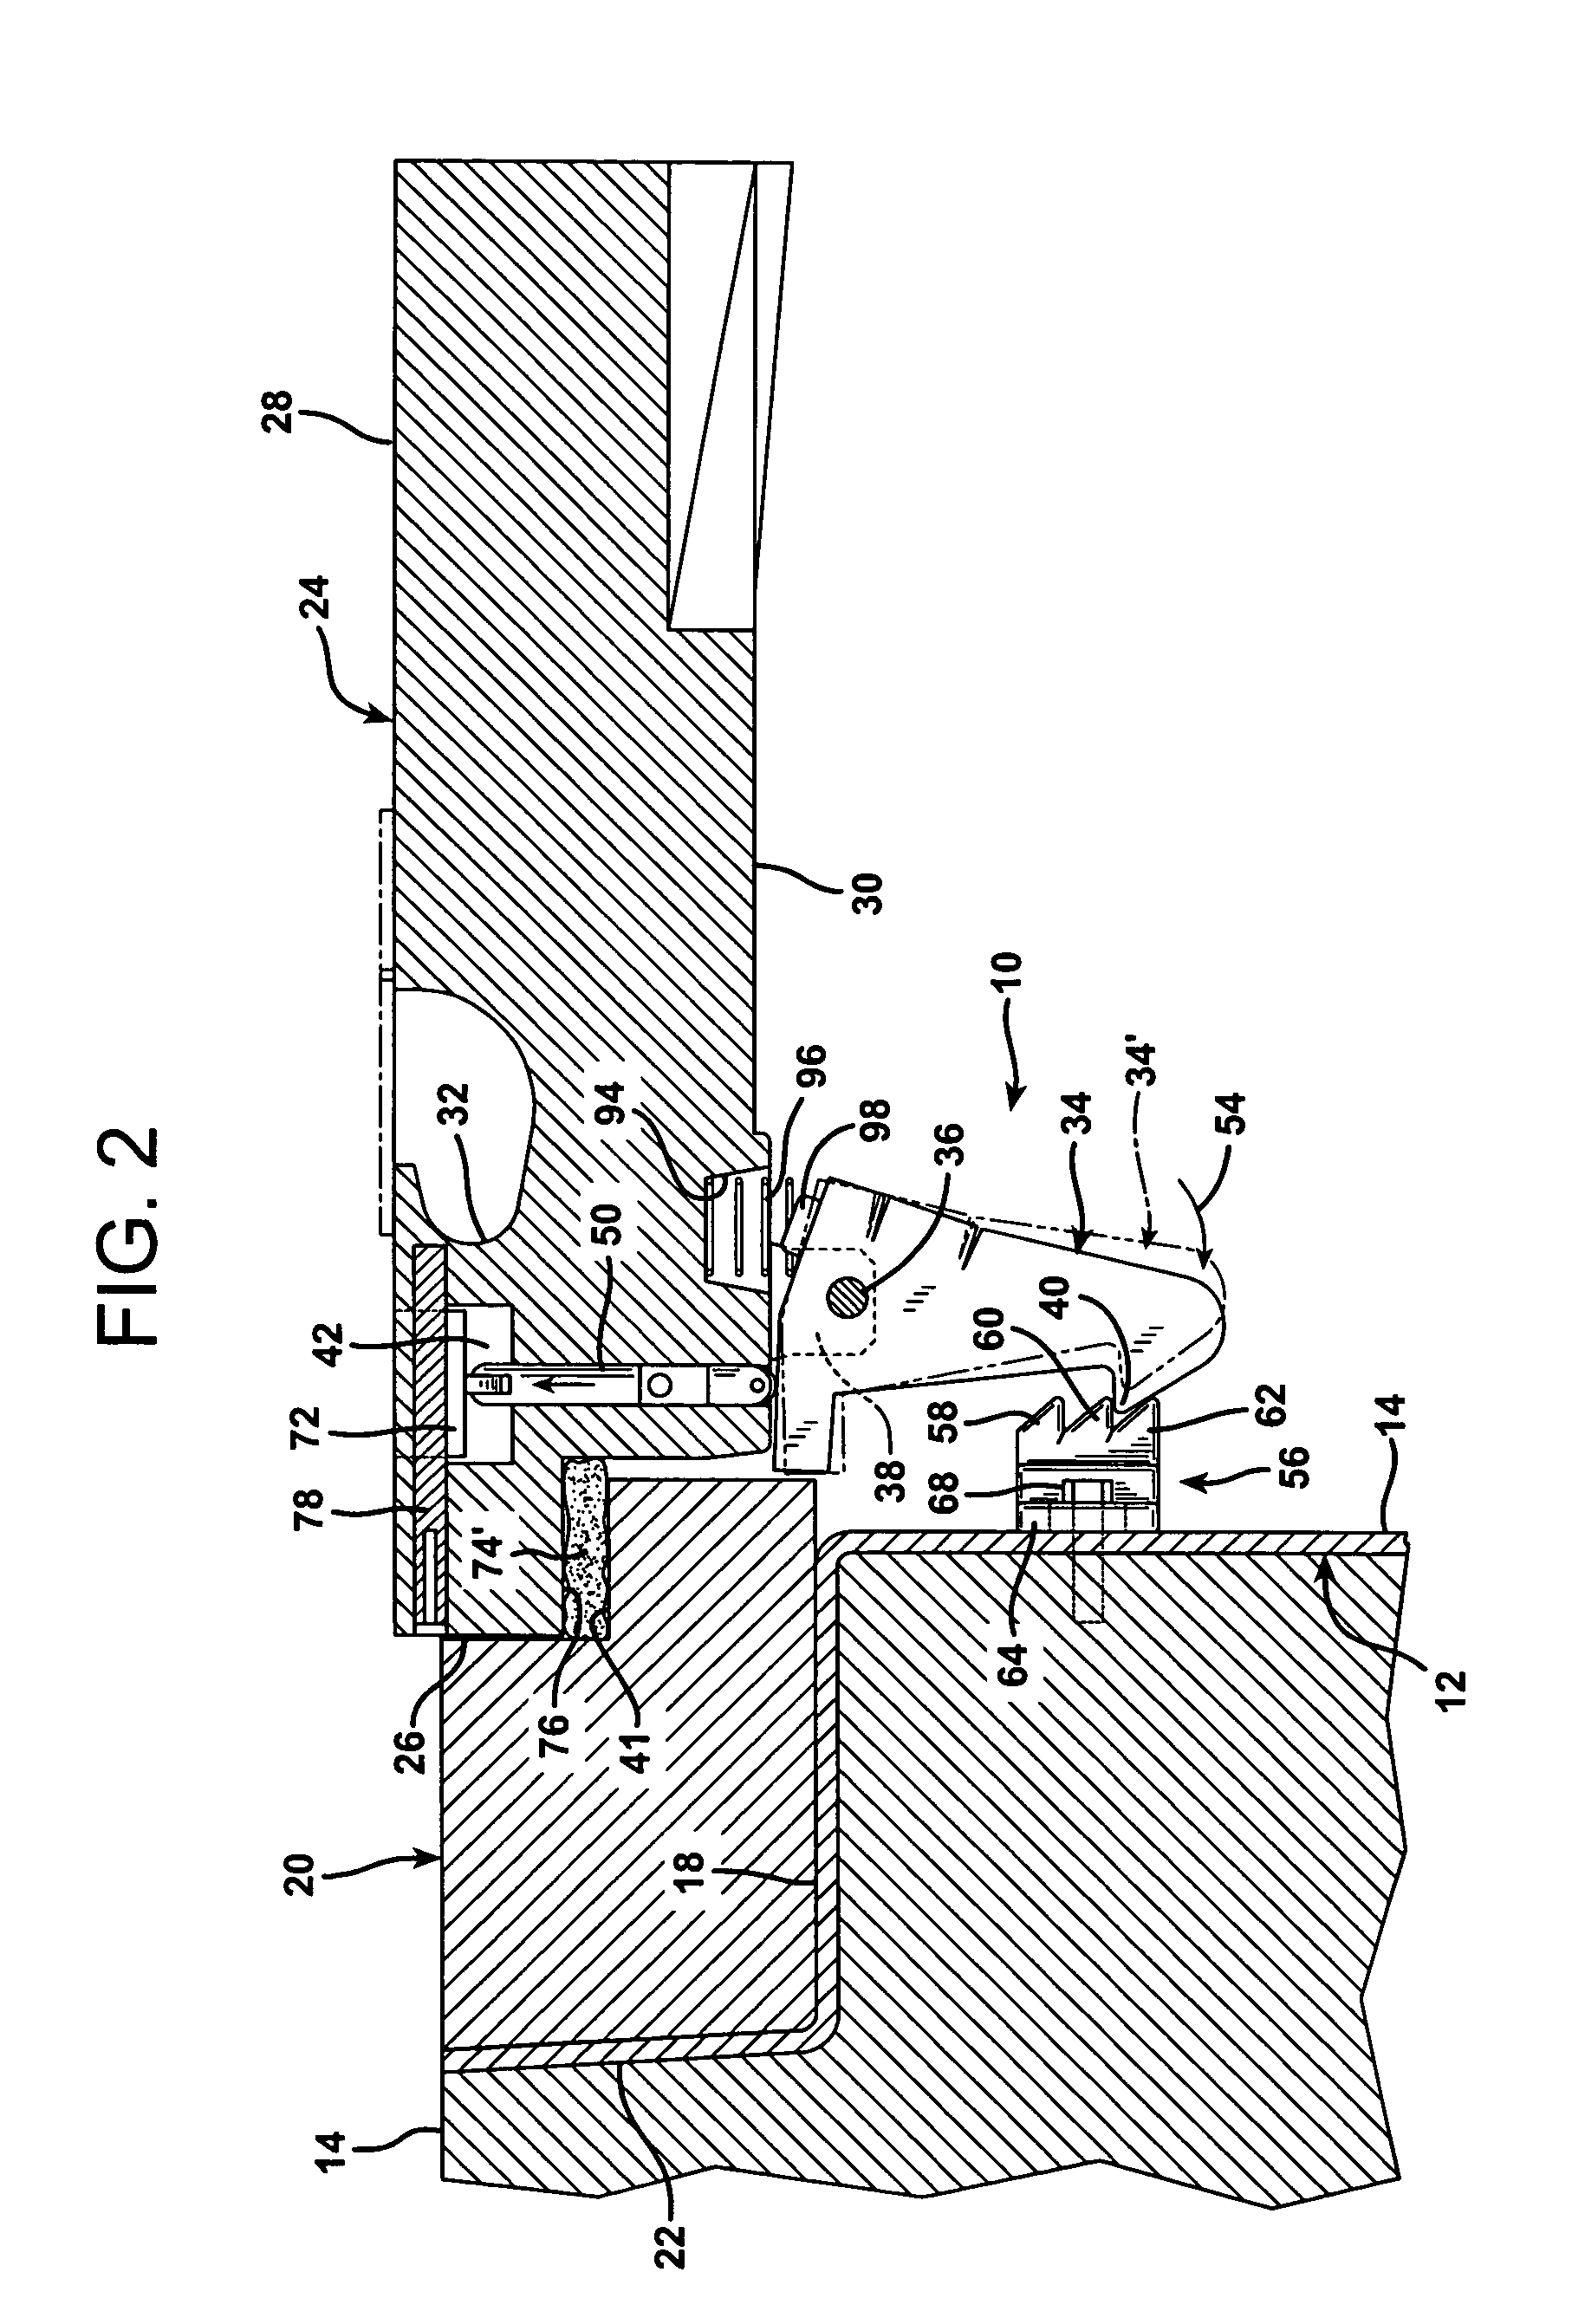 Multi-position aircraft servicing pit lid latch